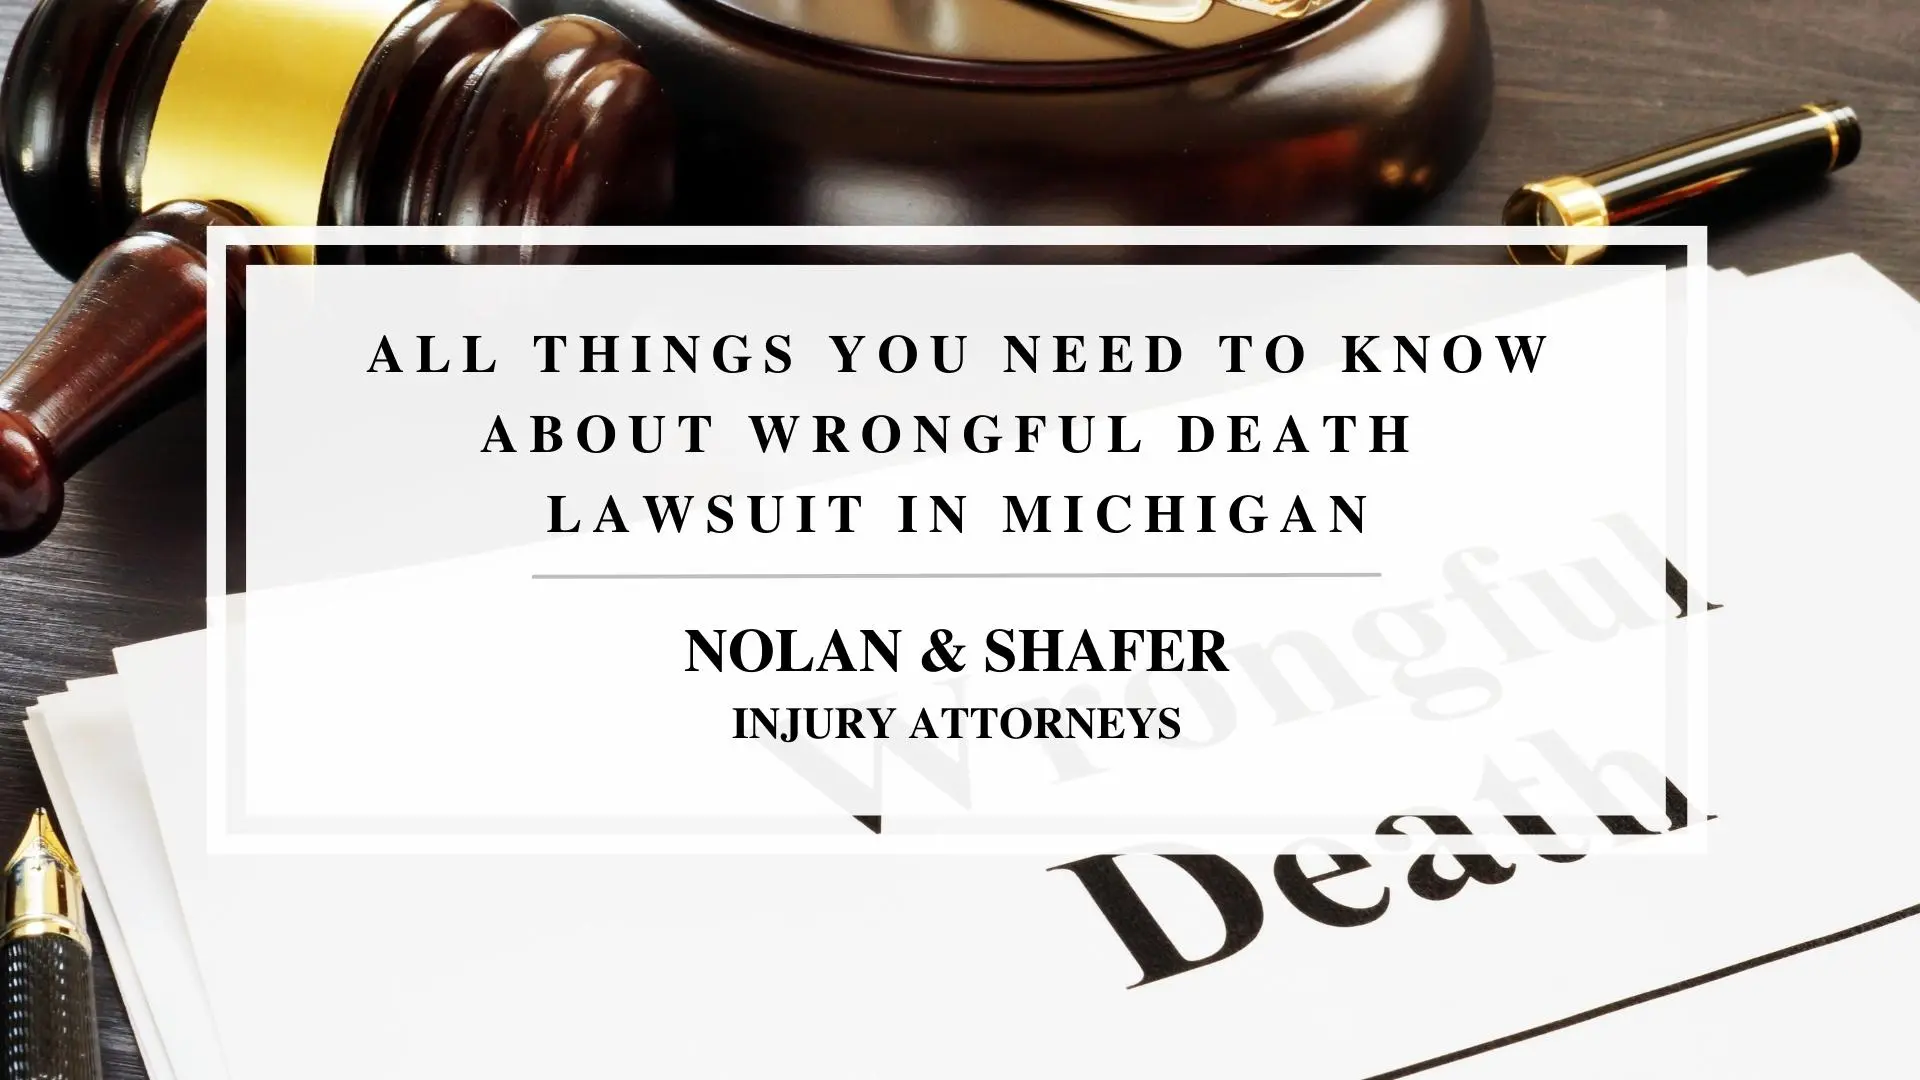 Featured image of all things you need to know about wrongful death lawsuits in Michigan